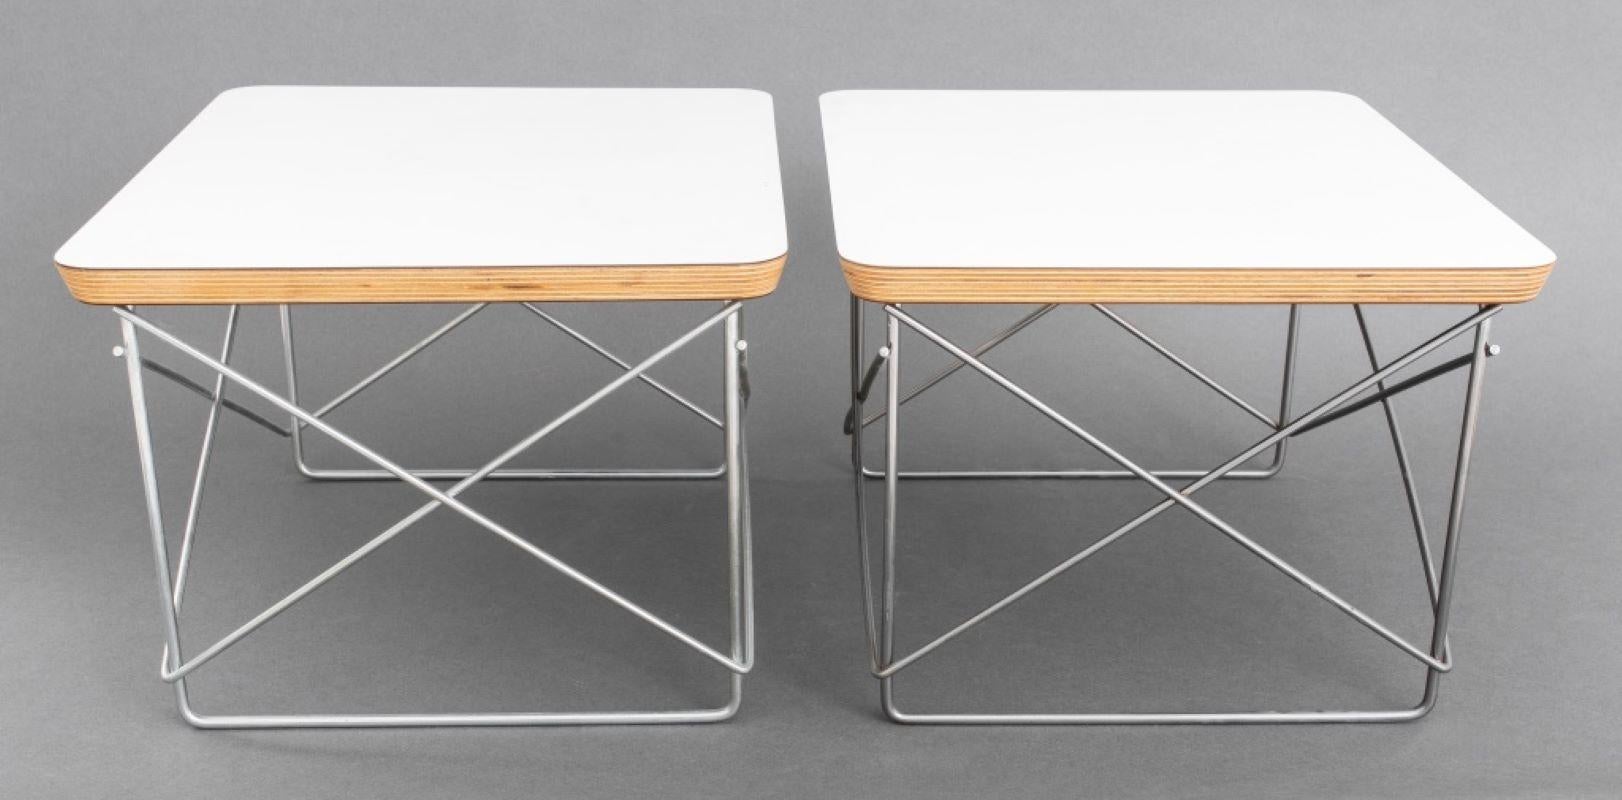 Eames for Herman Miller pair of Modern LTR side tables with white tops, marked on bottom.

Dimensions: 10